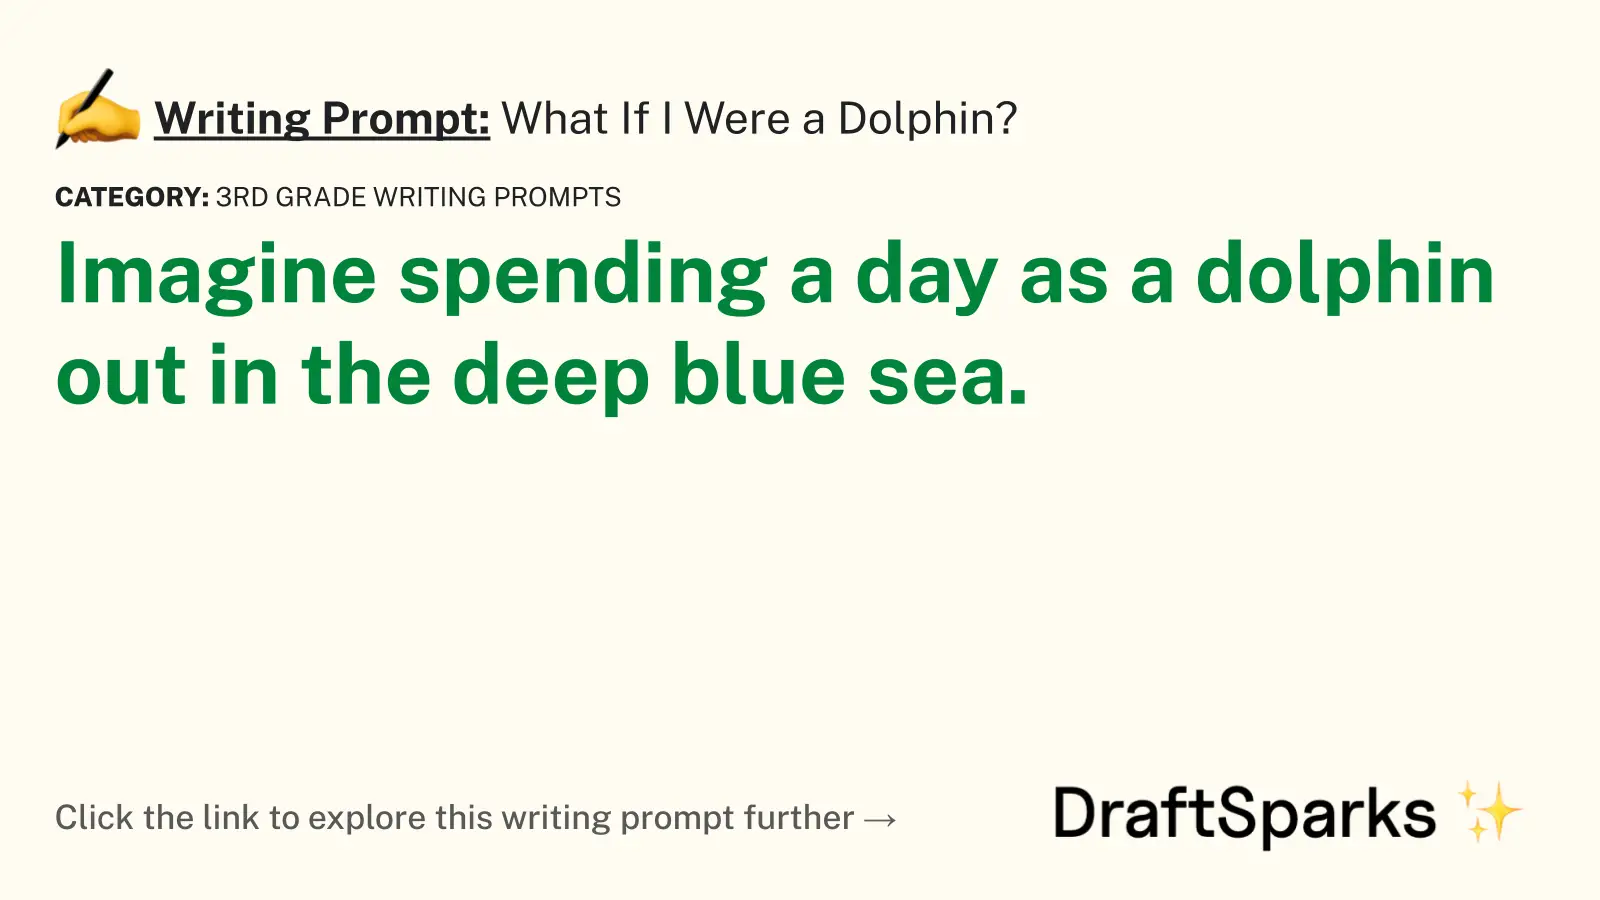 What If I Were a Dolphin?